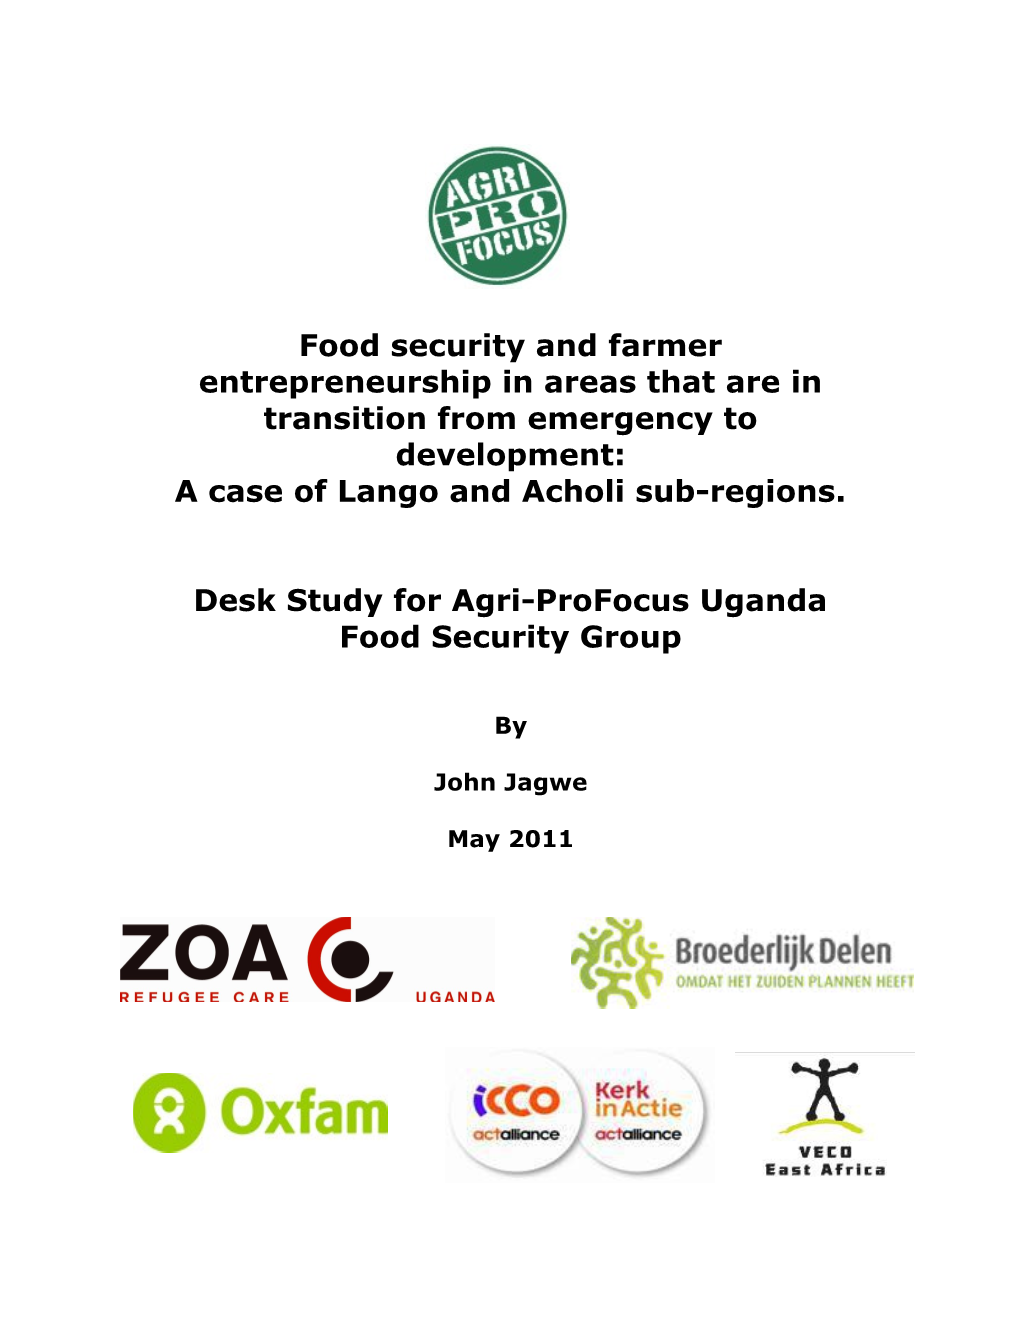 Food Security and Farmer Entrepreneurship in Areas That Are in Transition from Emergency